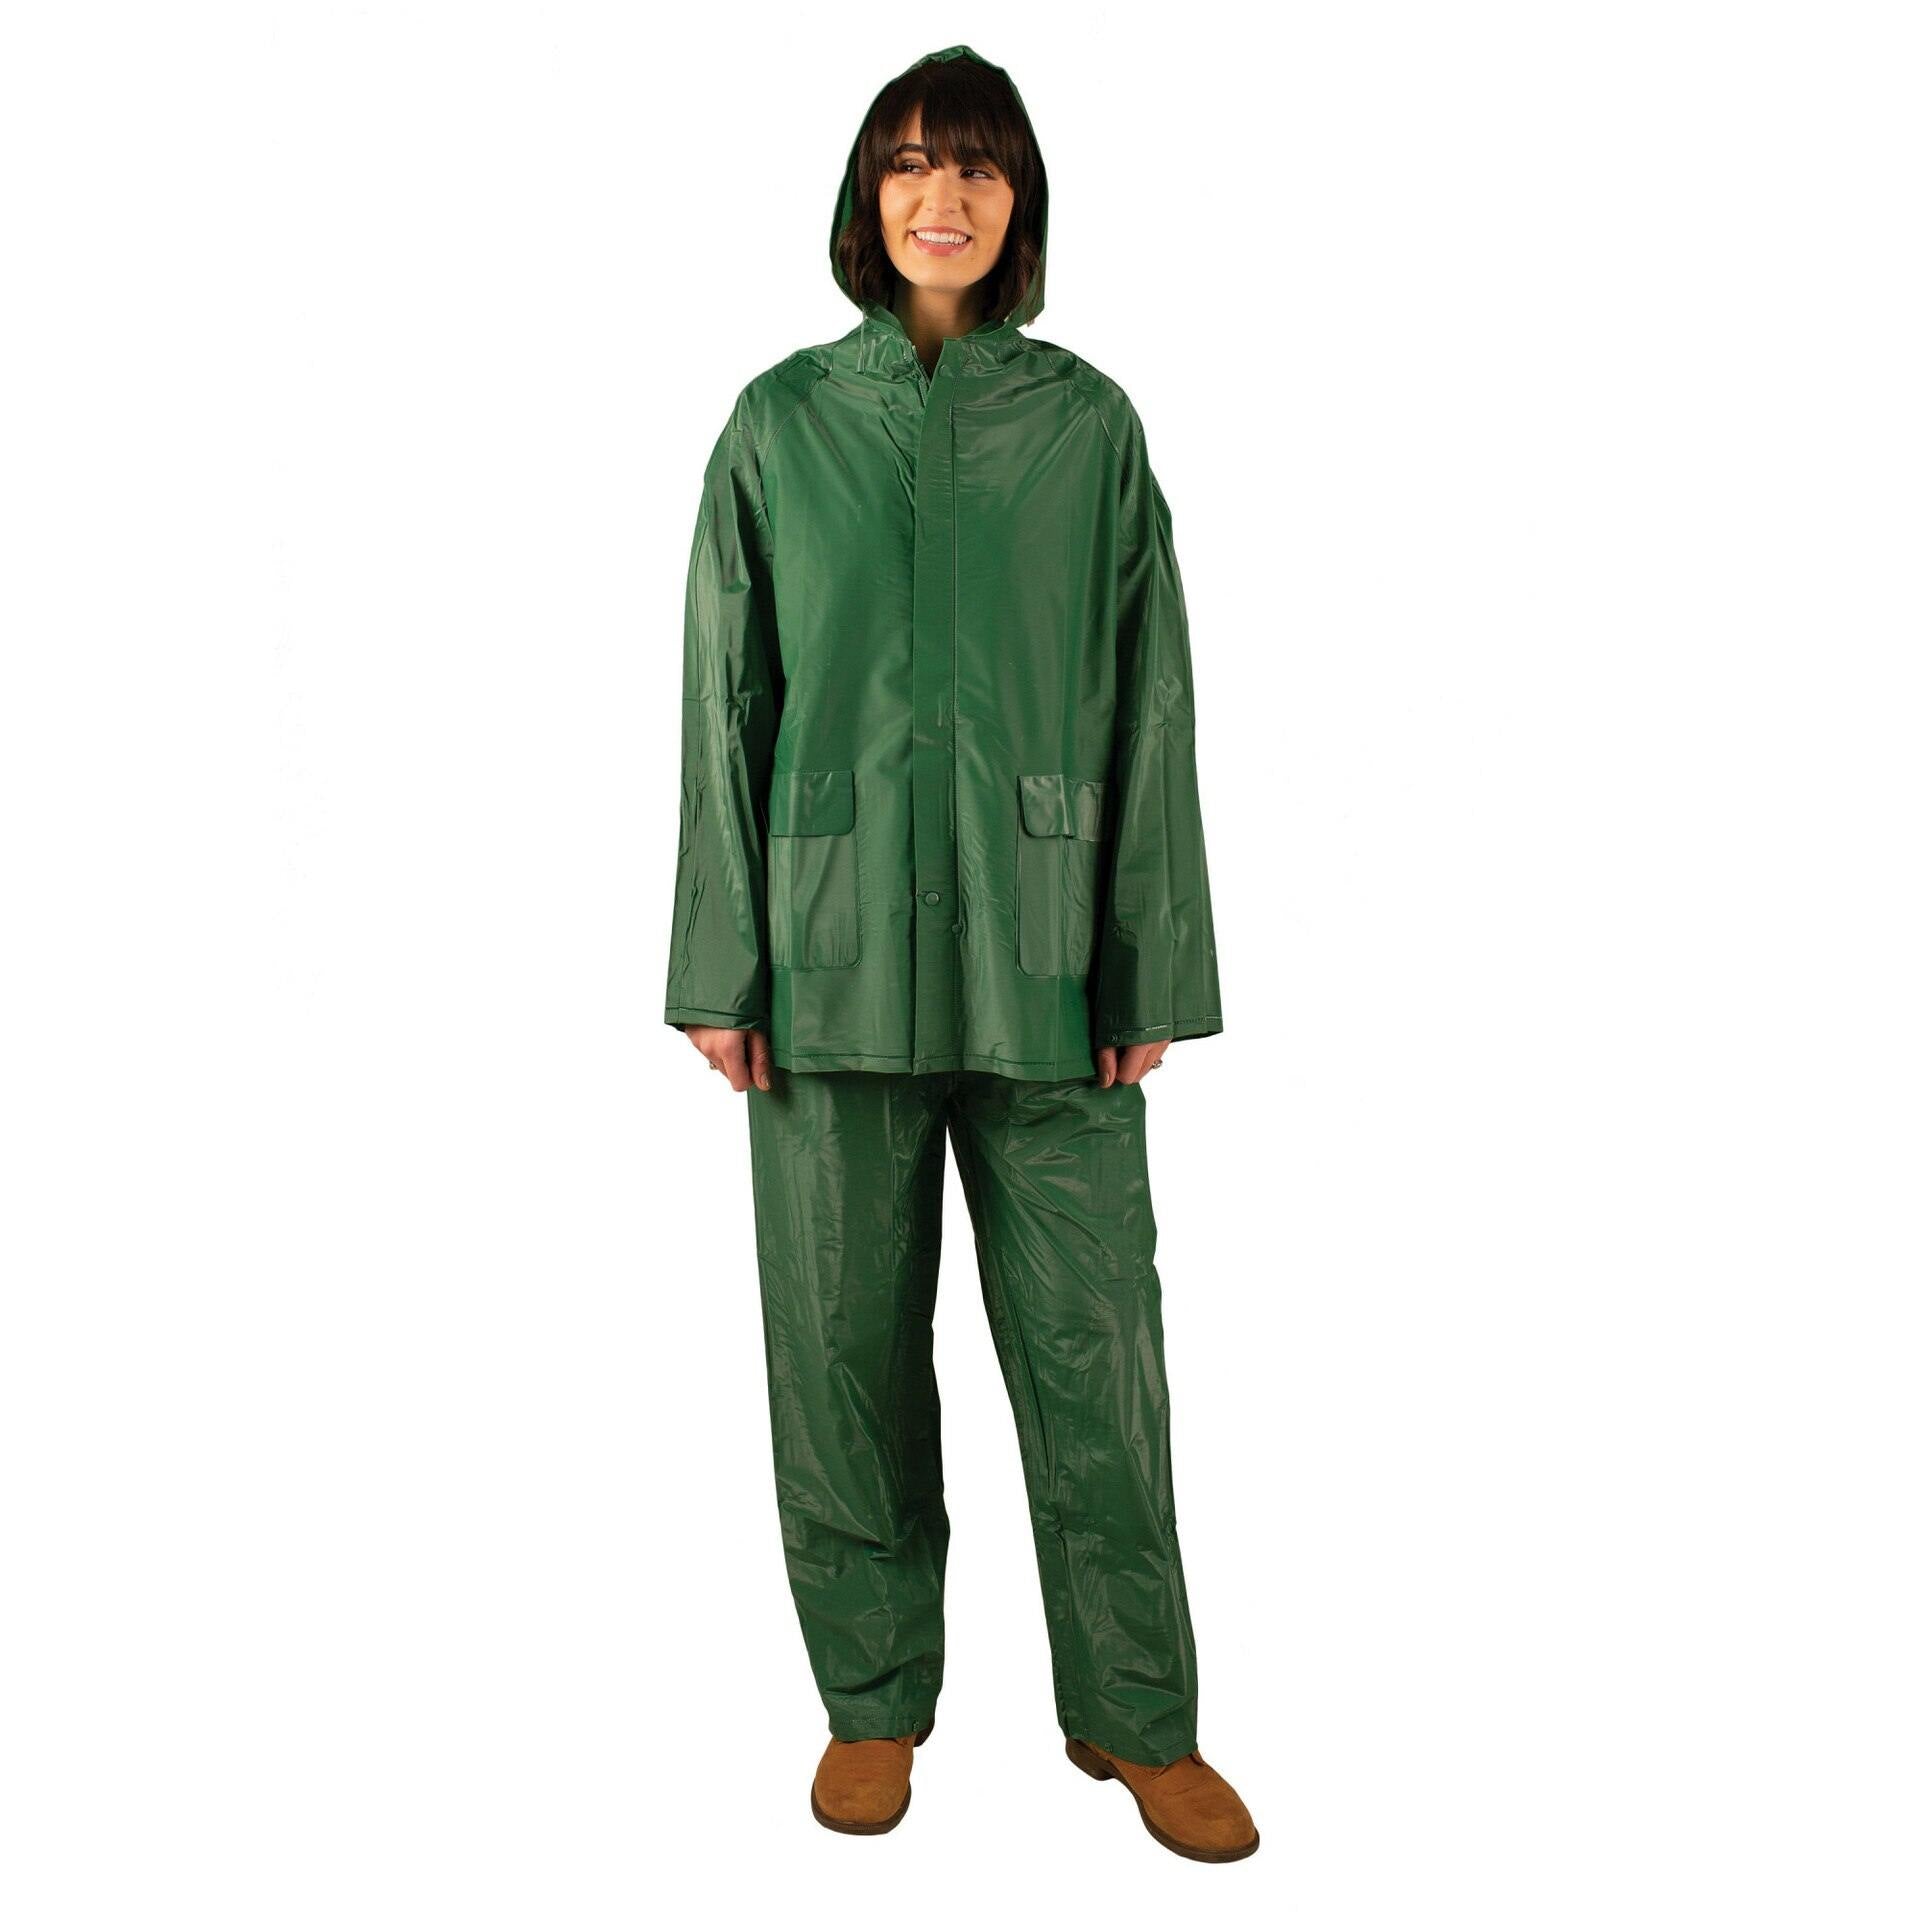 Stansport 2-Piece Laminated Industrail Rainsuit - Green - Leapfrog Outdoor Sports and Apparel